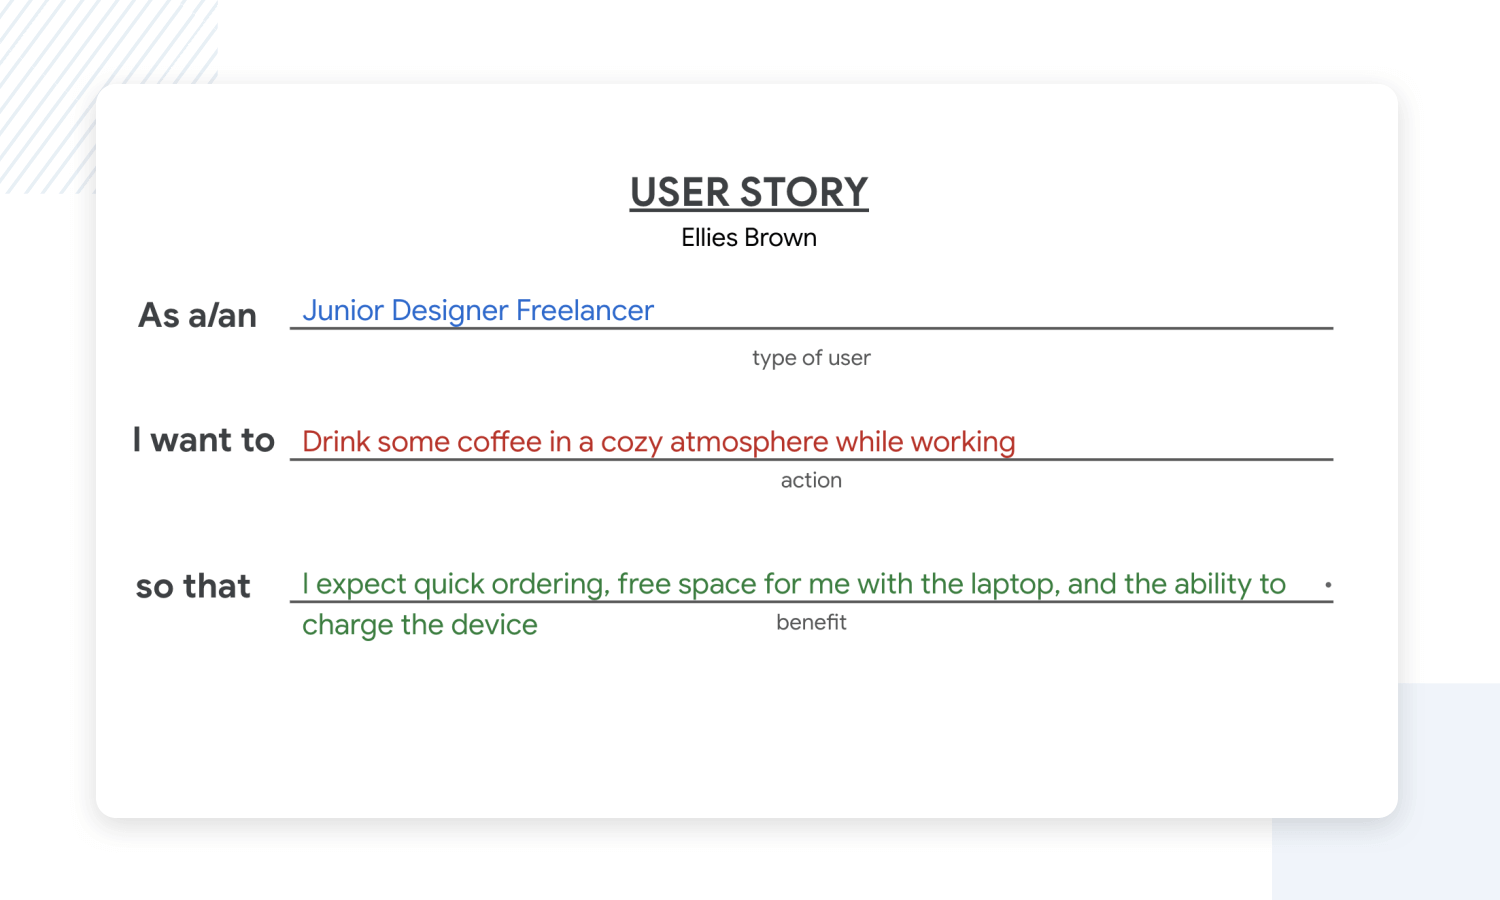 User story for a junior freelancer needing a cozy workspace with quick service and charging facilities